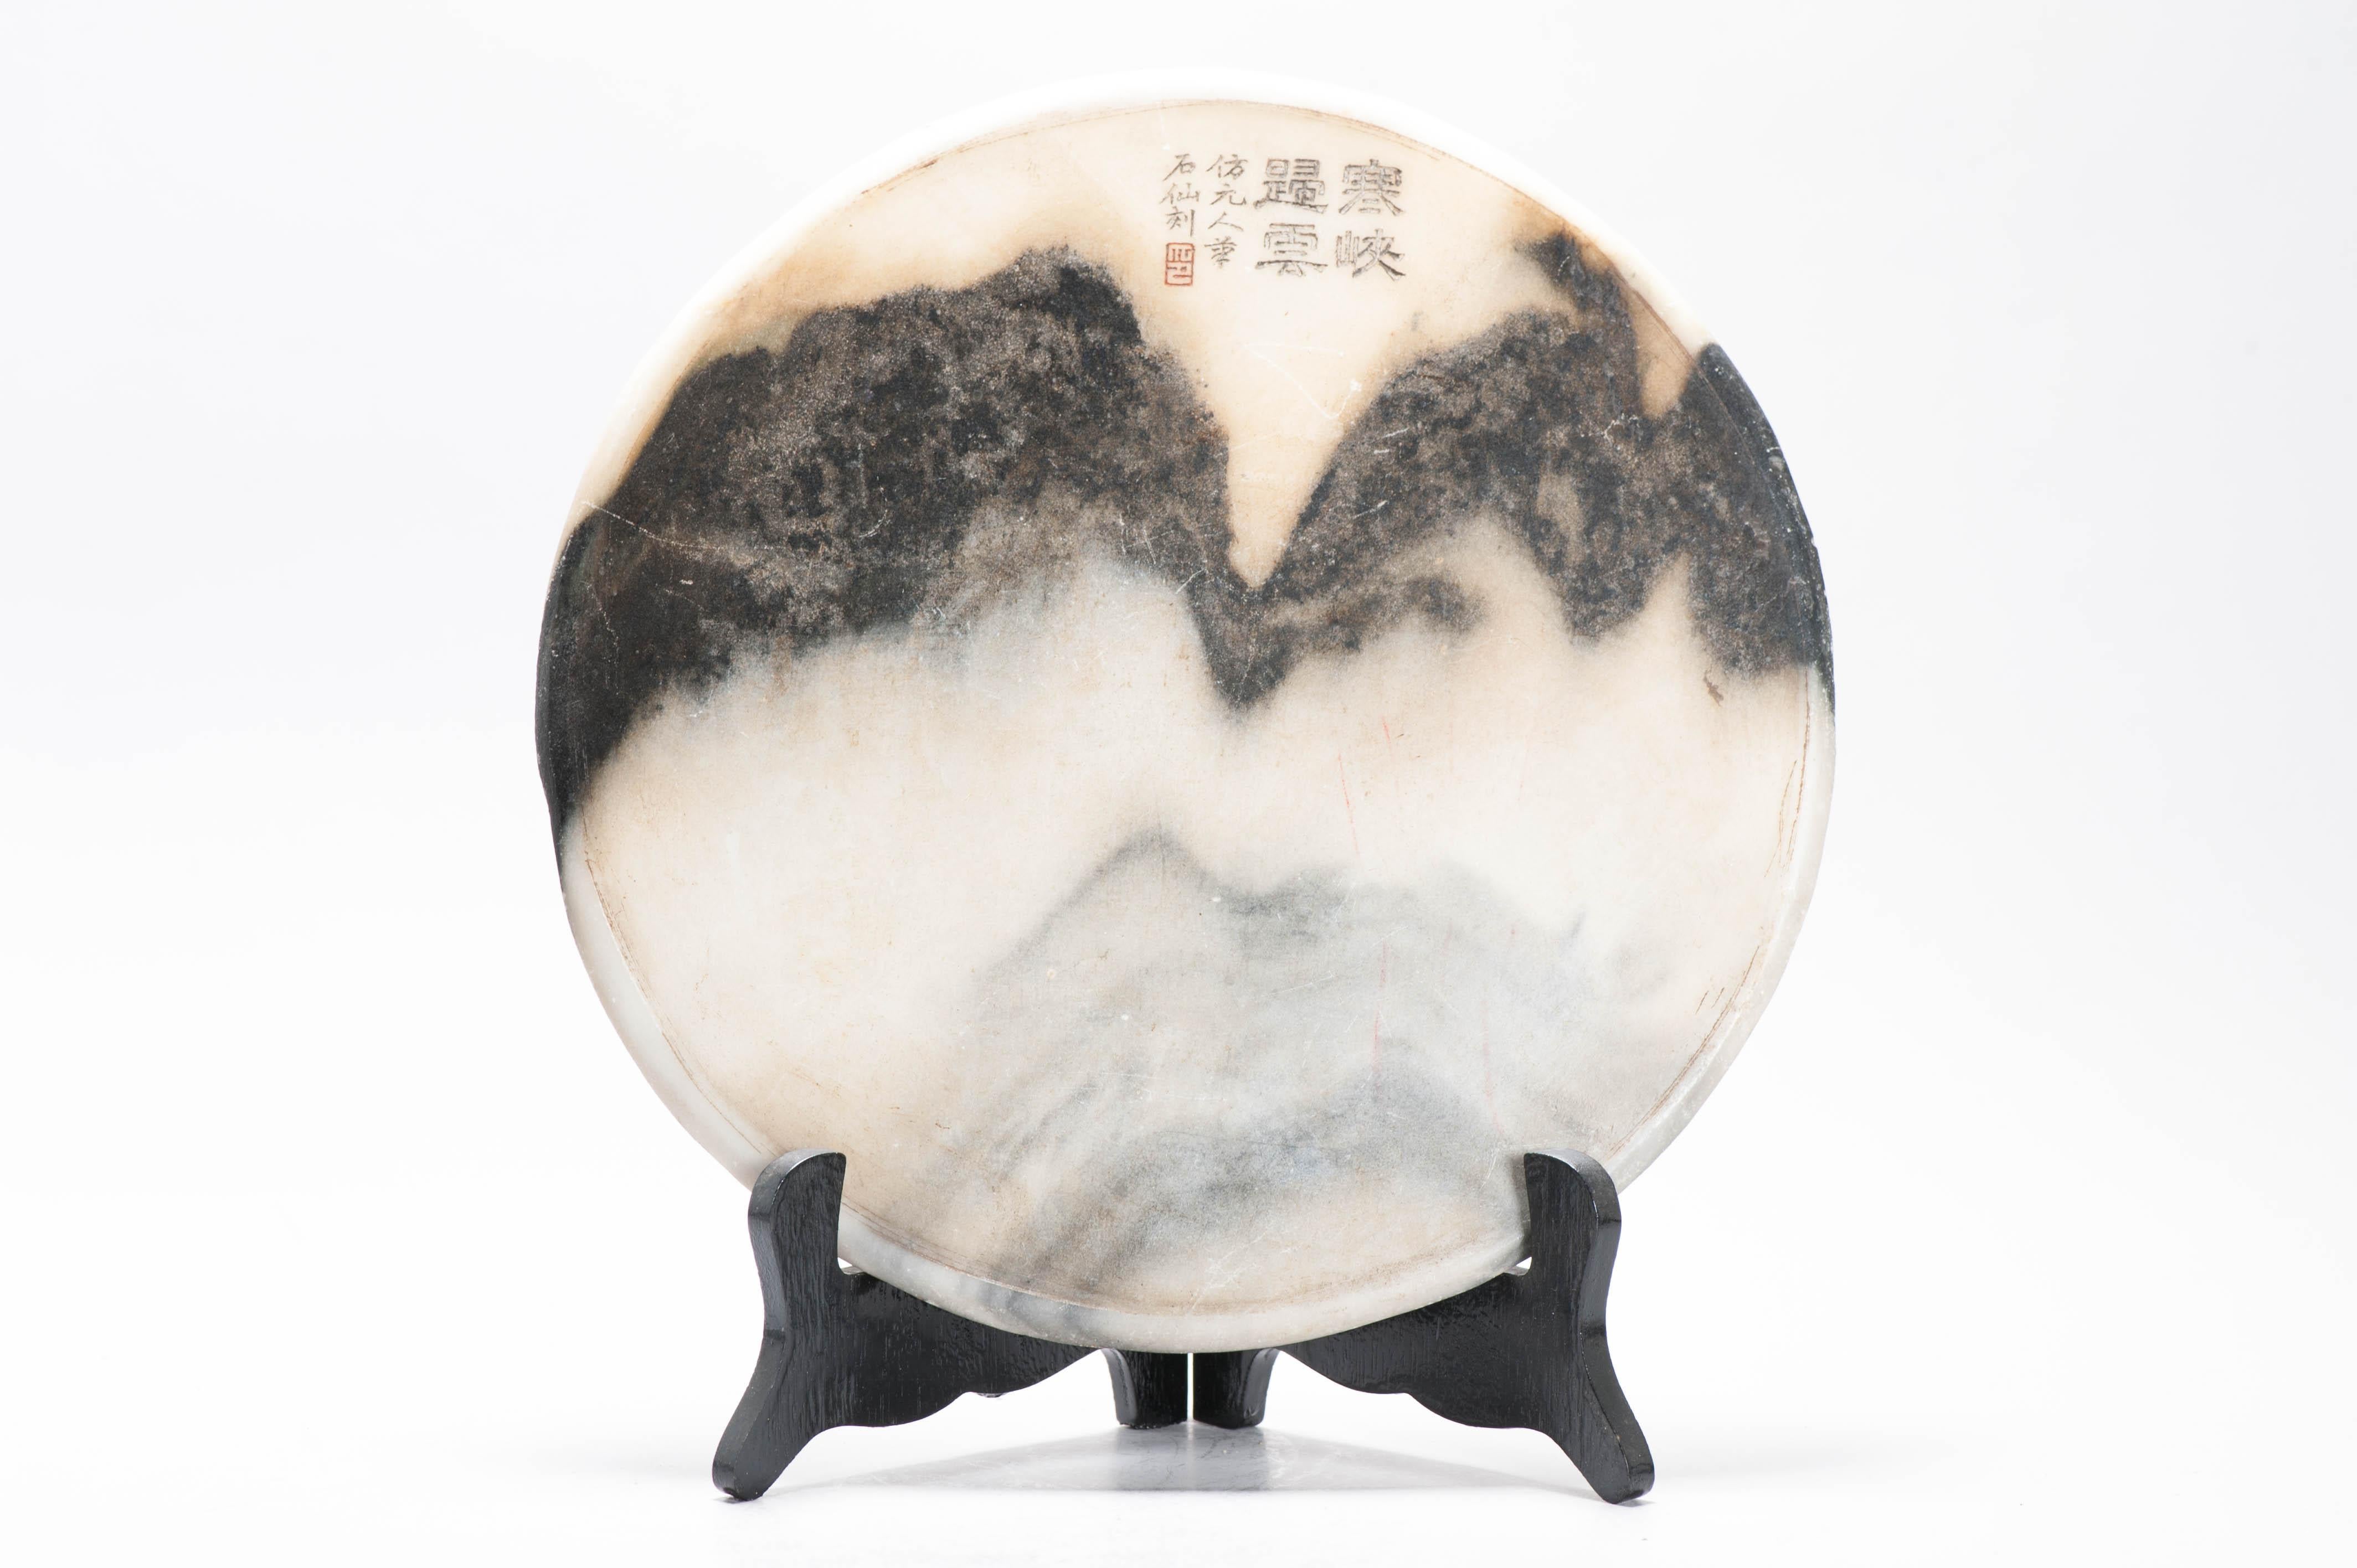 A Chinese Landscape Dream Stone. Inscribed with a poem in the 19th century. The stone reminiscent of the Yuan landscapes in the style of Ni Zan. These rock were treasured by Chinese Literati and Scholars. This art form is centuries of years old